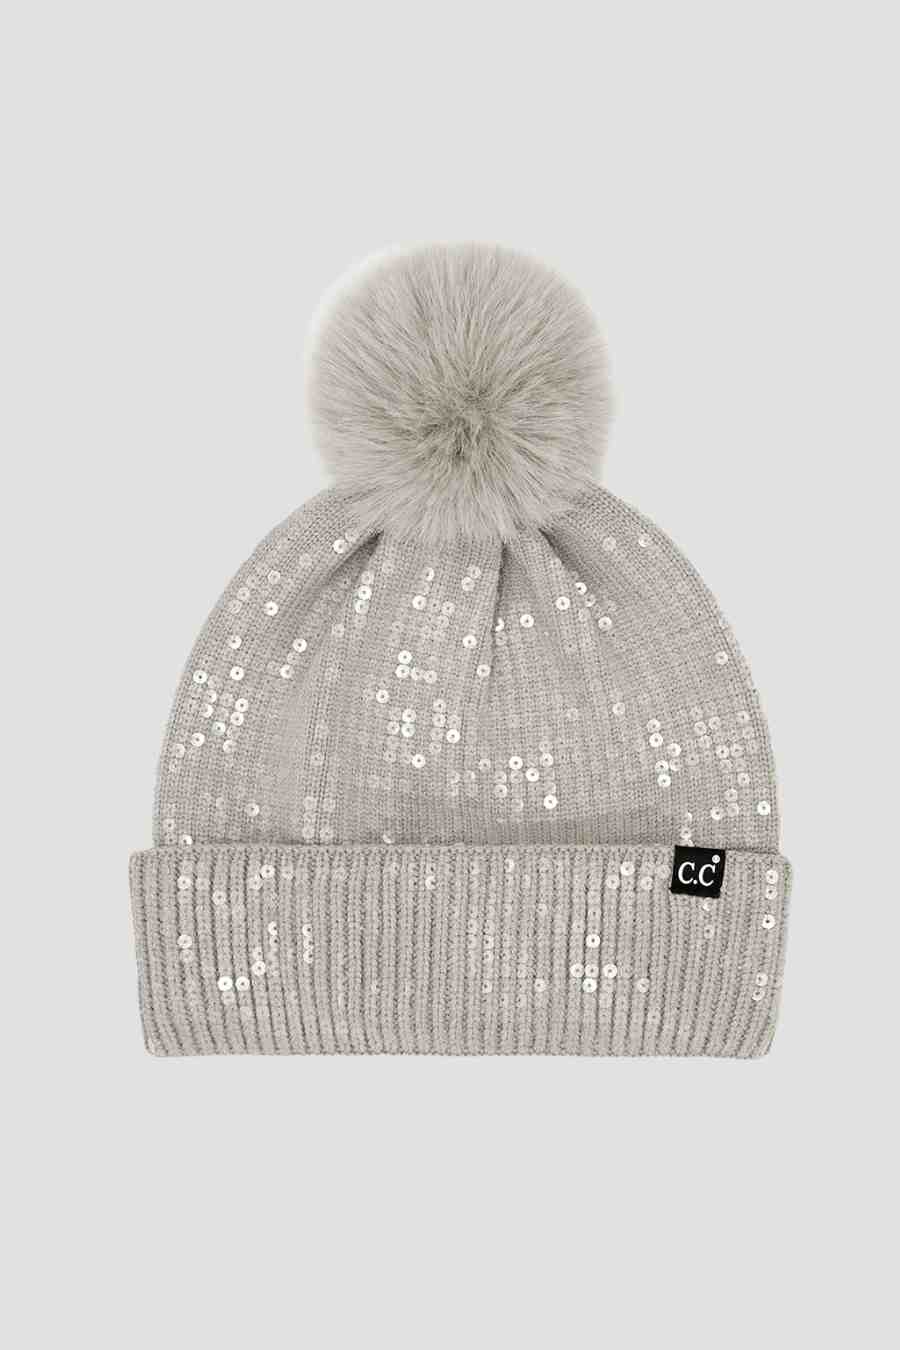 Clear Sequined Cuff Beanie with Pom Pom